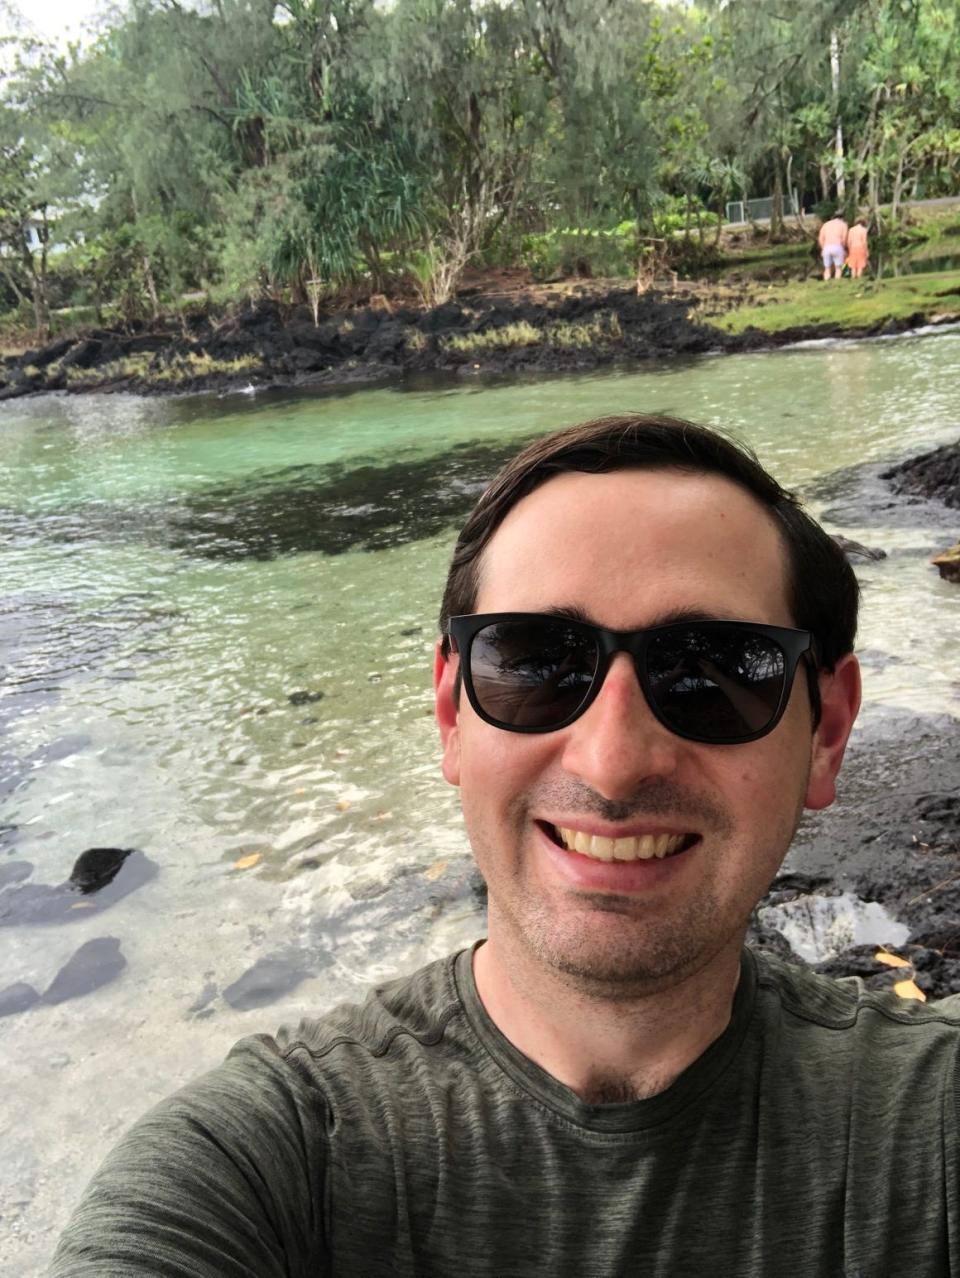 Reporter Alex Bitter wearing sunglasses and a dark green shirt standing near the water at a beach outside Hilo, Hawaii